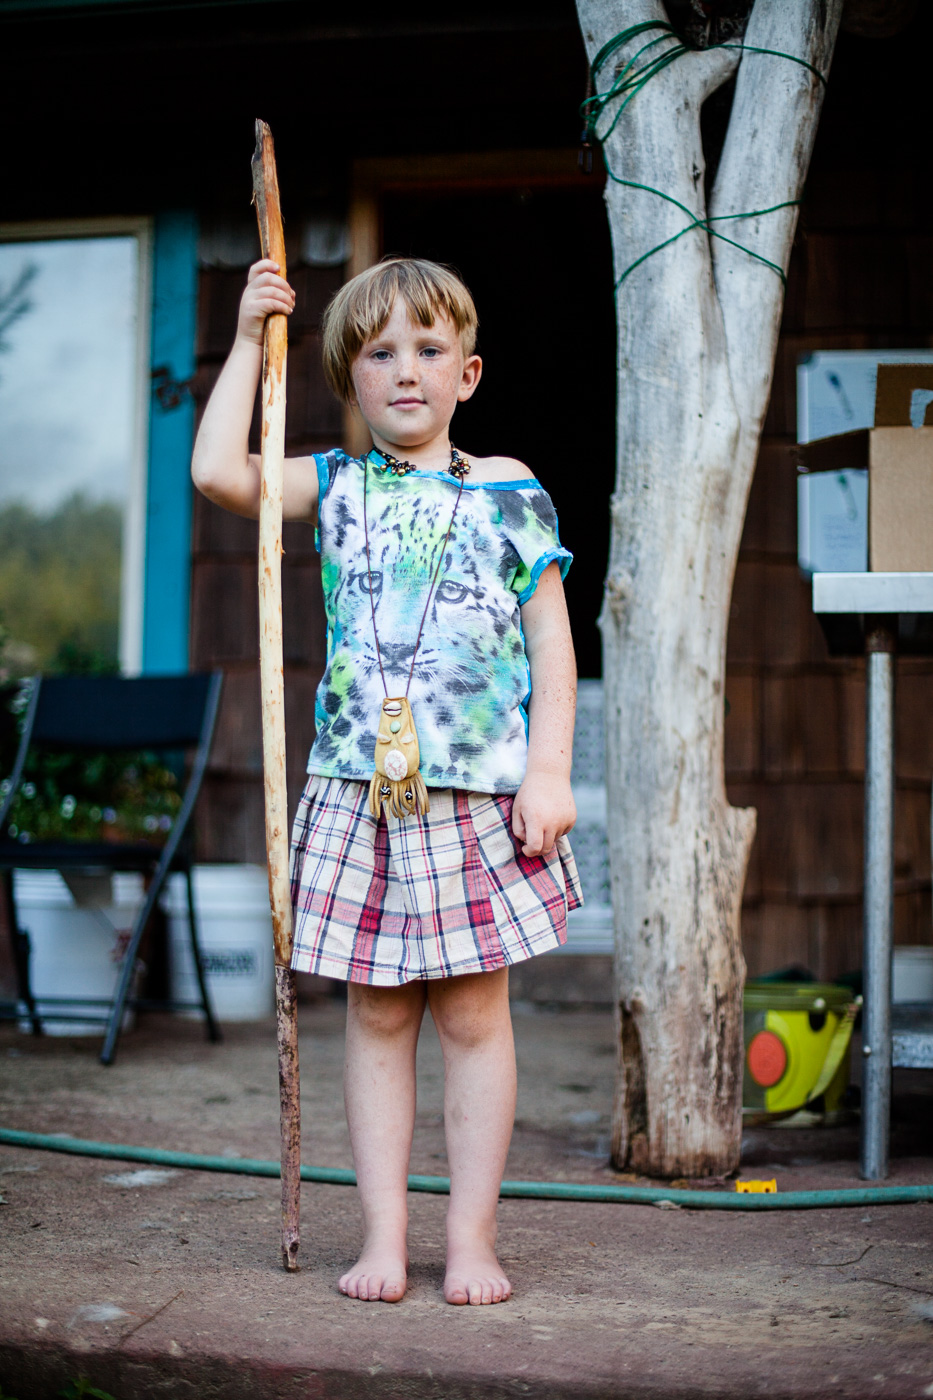 Sara Stathas portrait photographer - a young farmer girl stands on the porch